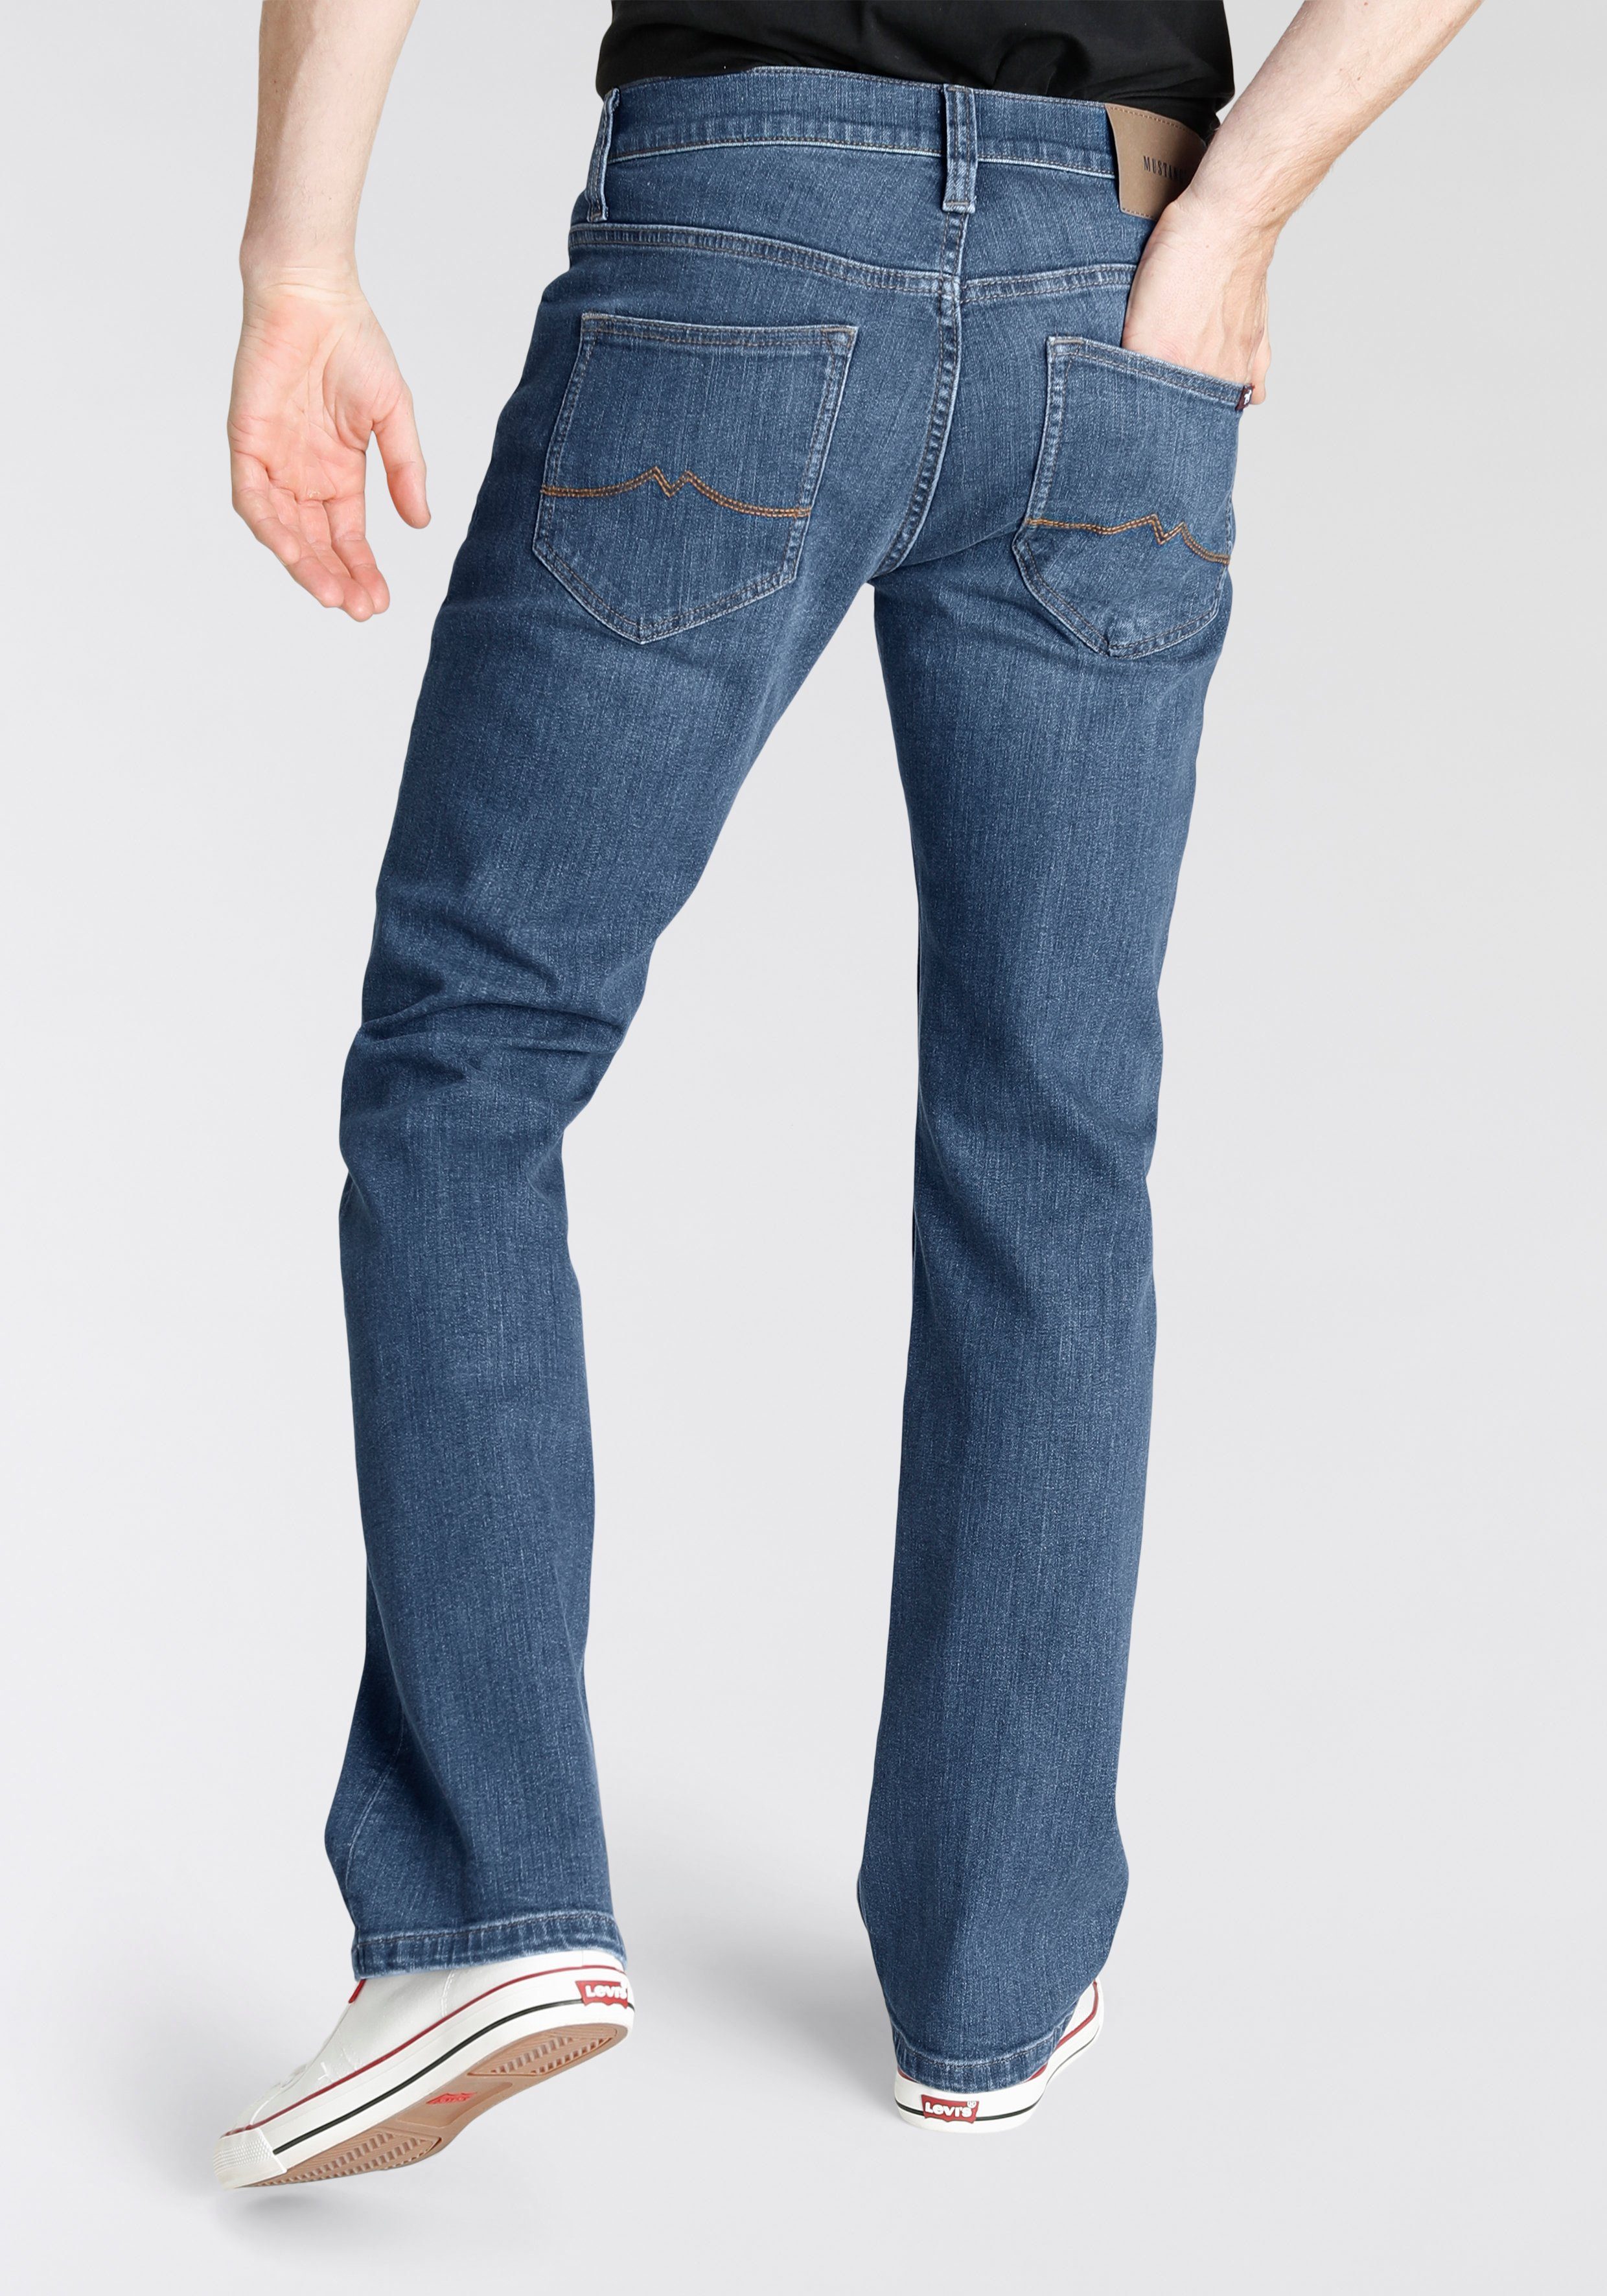 wash BOOTCUT STYLE OREGON Bootcut-Jeans dark MUSTANG blue